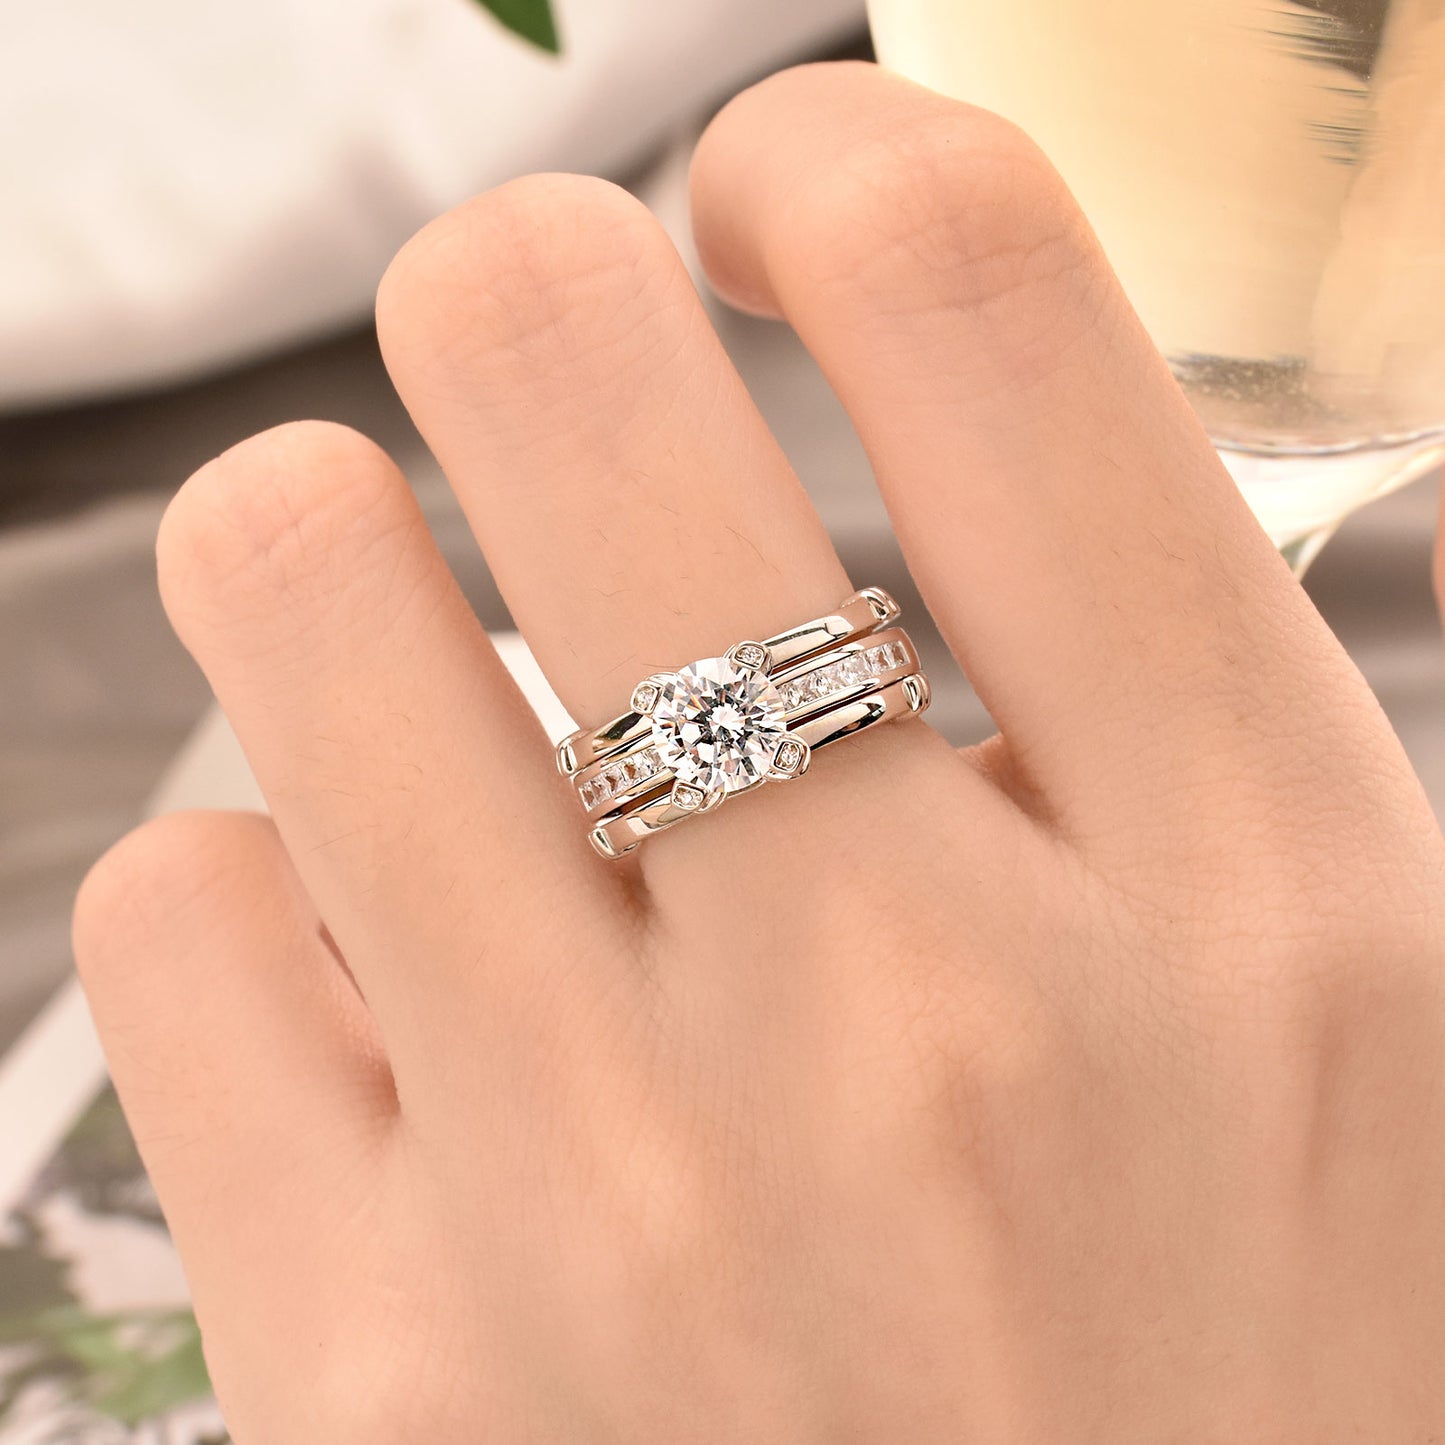 2 Pieces Solid 925 Sterling Silver Novelty Solitaire Round Cut Wedding Engagement Ring Set For Women AAAAA Cubic Zircon